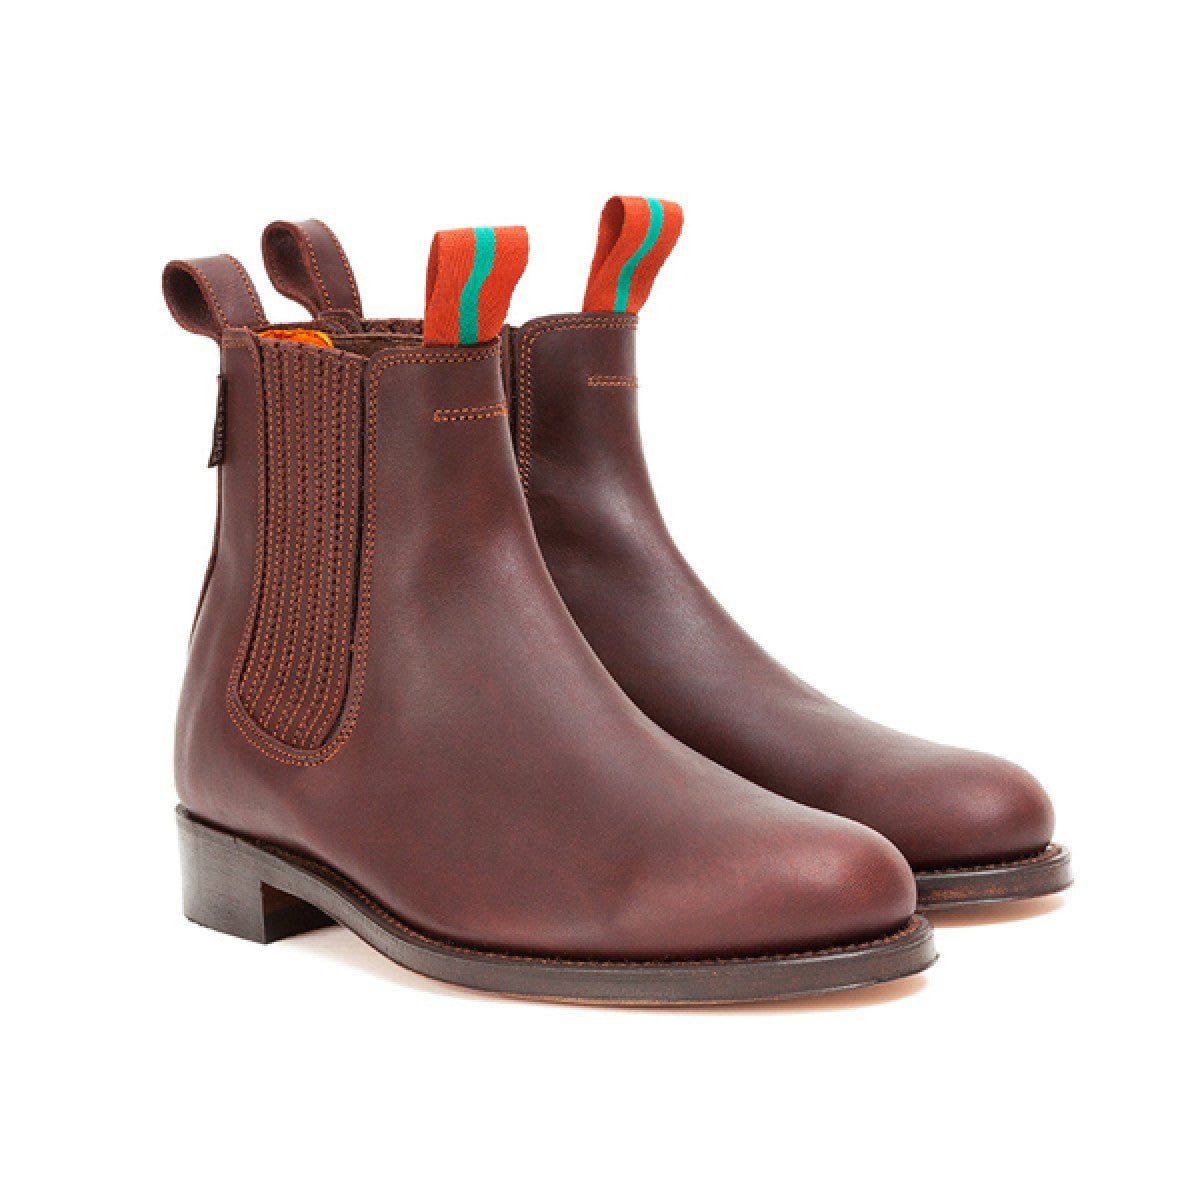 YARD BOOT MENS, Footwear, Penelope Chilvers - Hickman & Bousfield, Safari and Travel Clothing